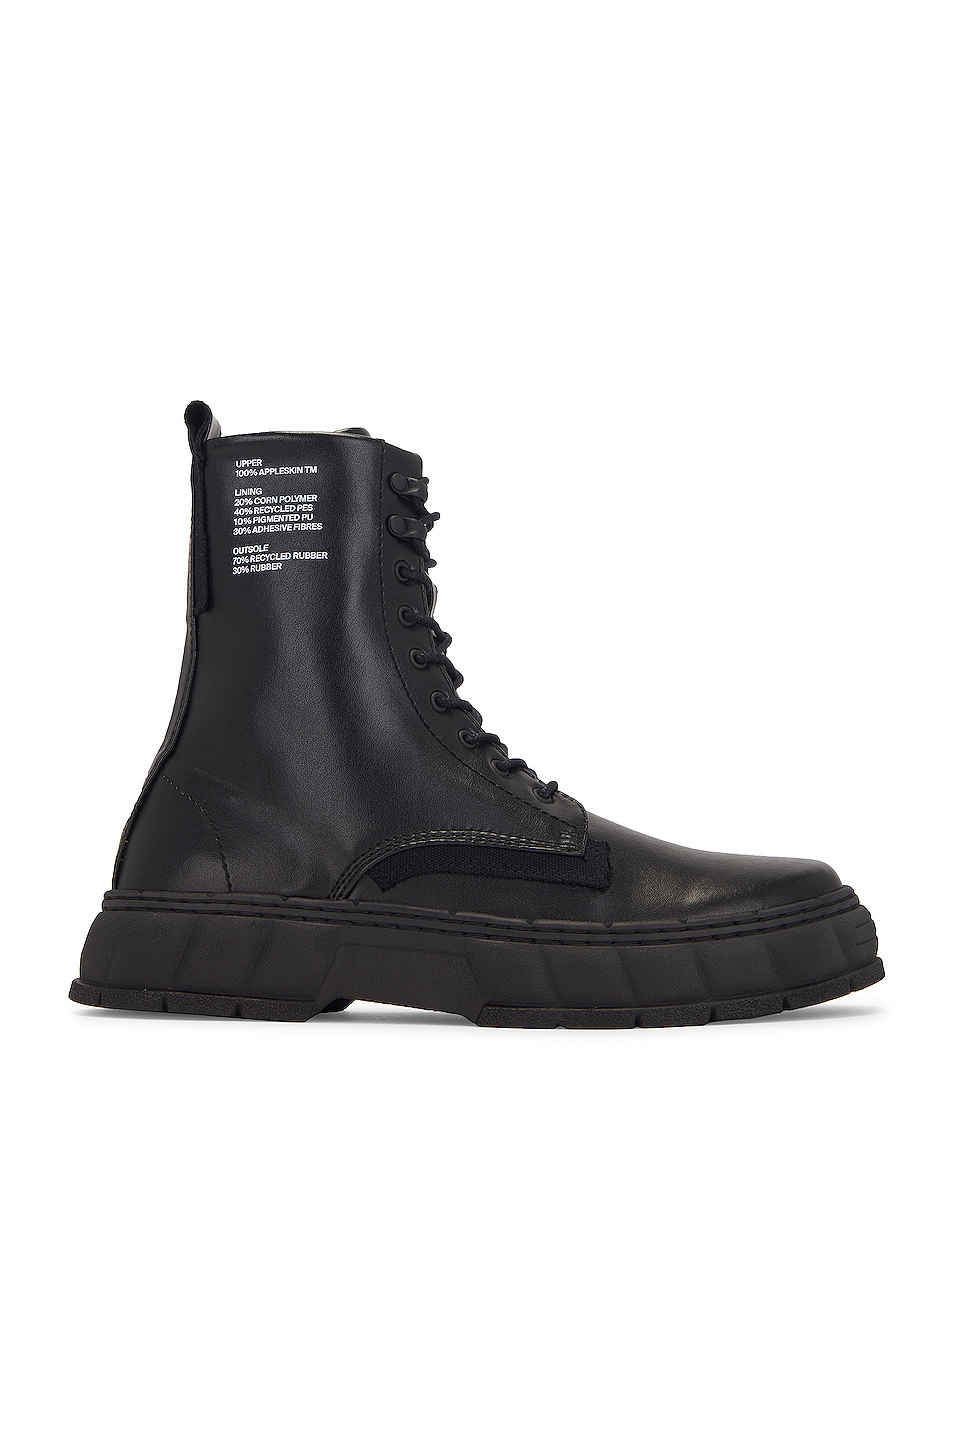 Image 1 of Viron 1992 Boot in Black Apple